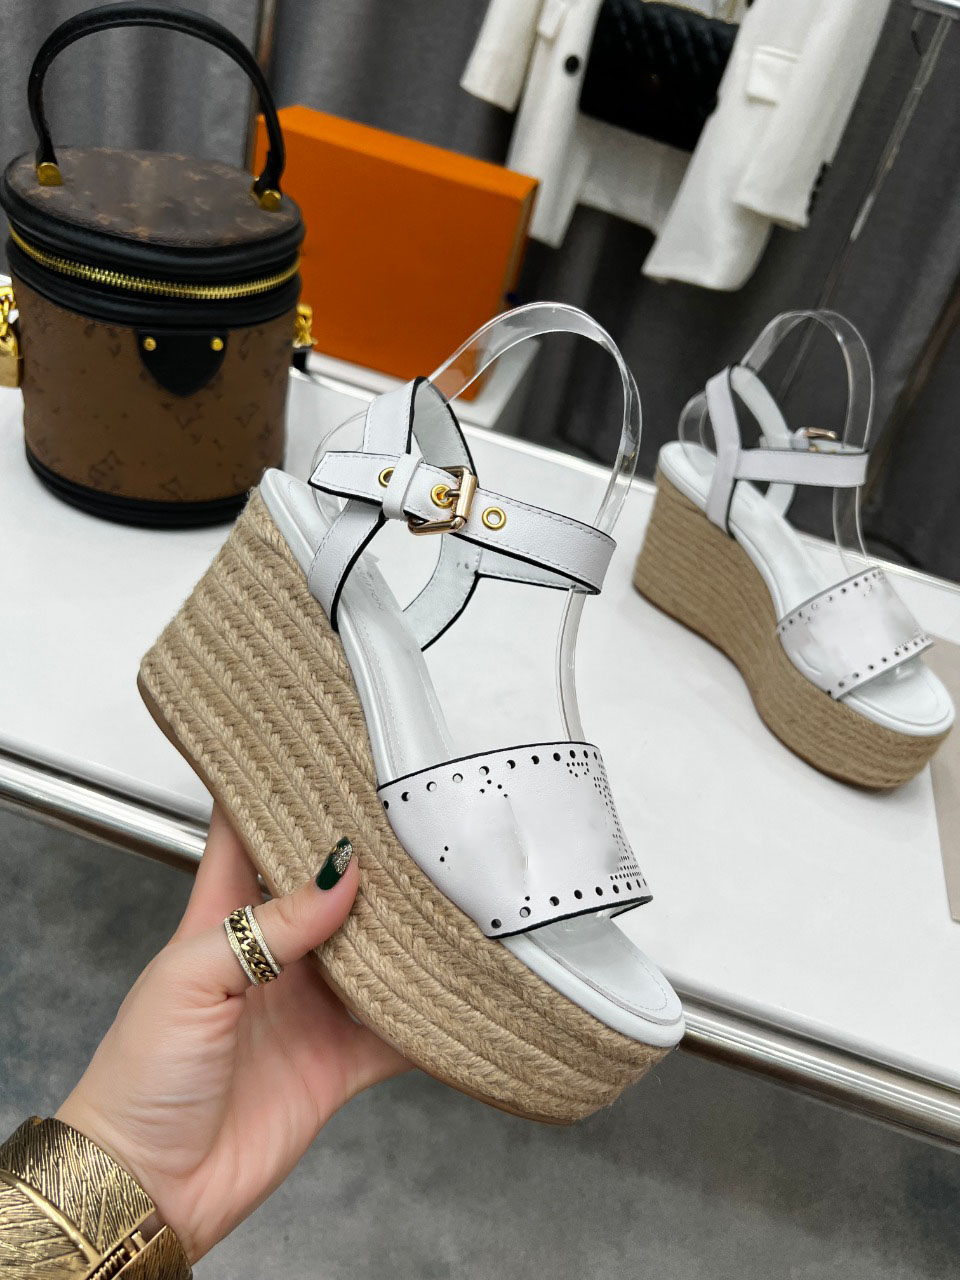 

2022 Starboard Wedge Sandal Women Designer Sandals High heel Espadrilles Natural Perforated Calf Leather Lady Slides Outdoor Shoes, Box